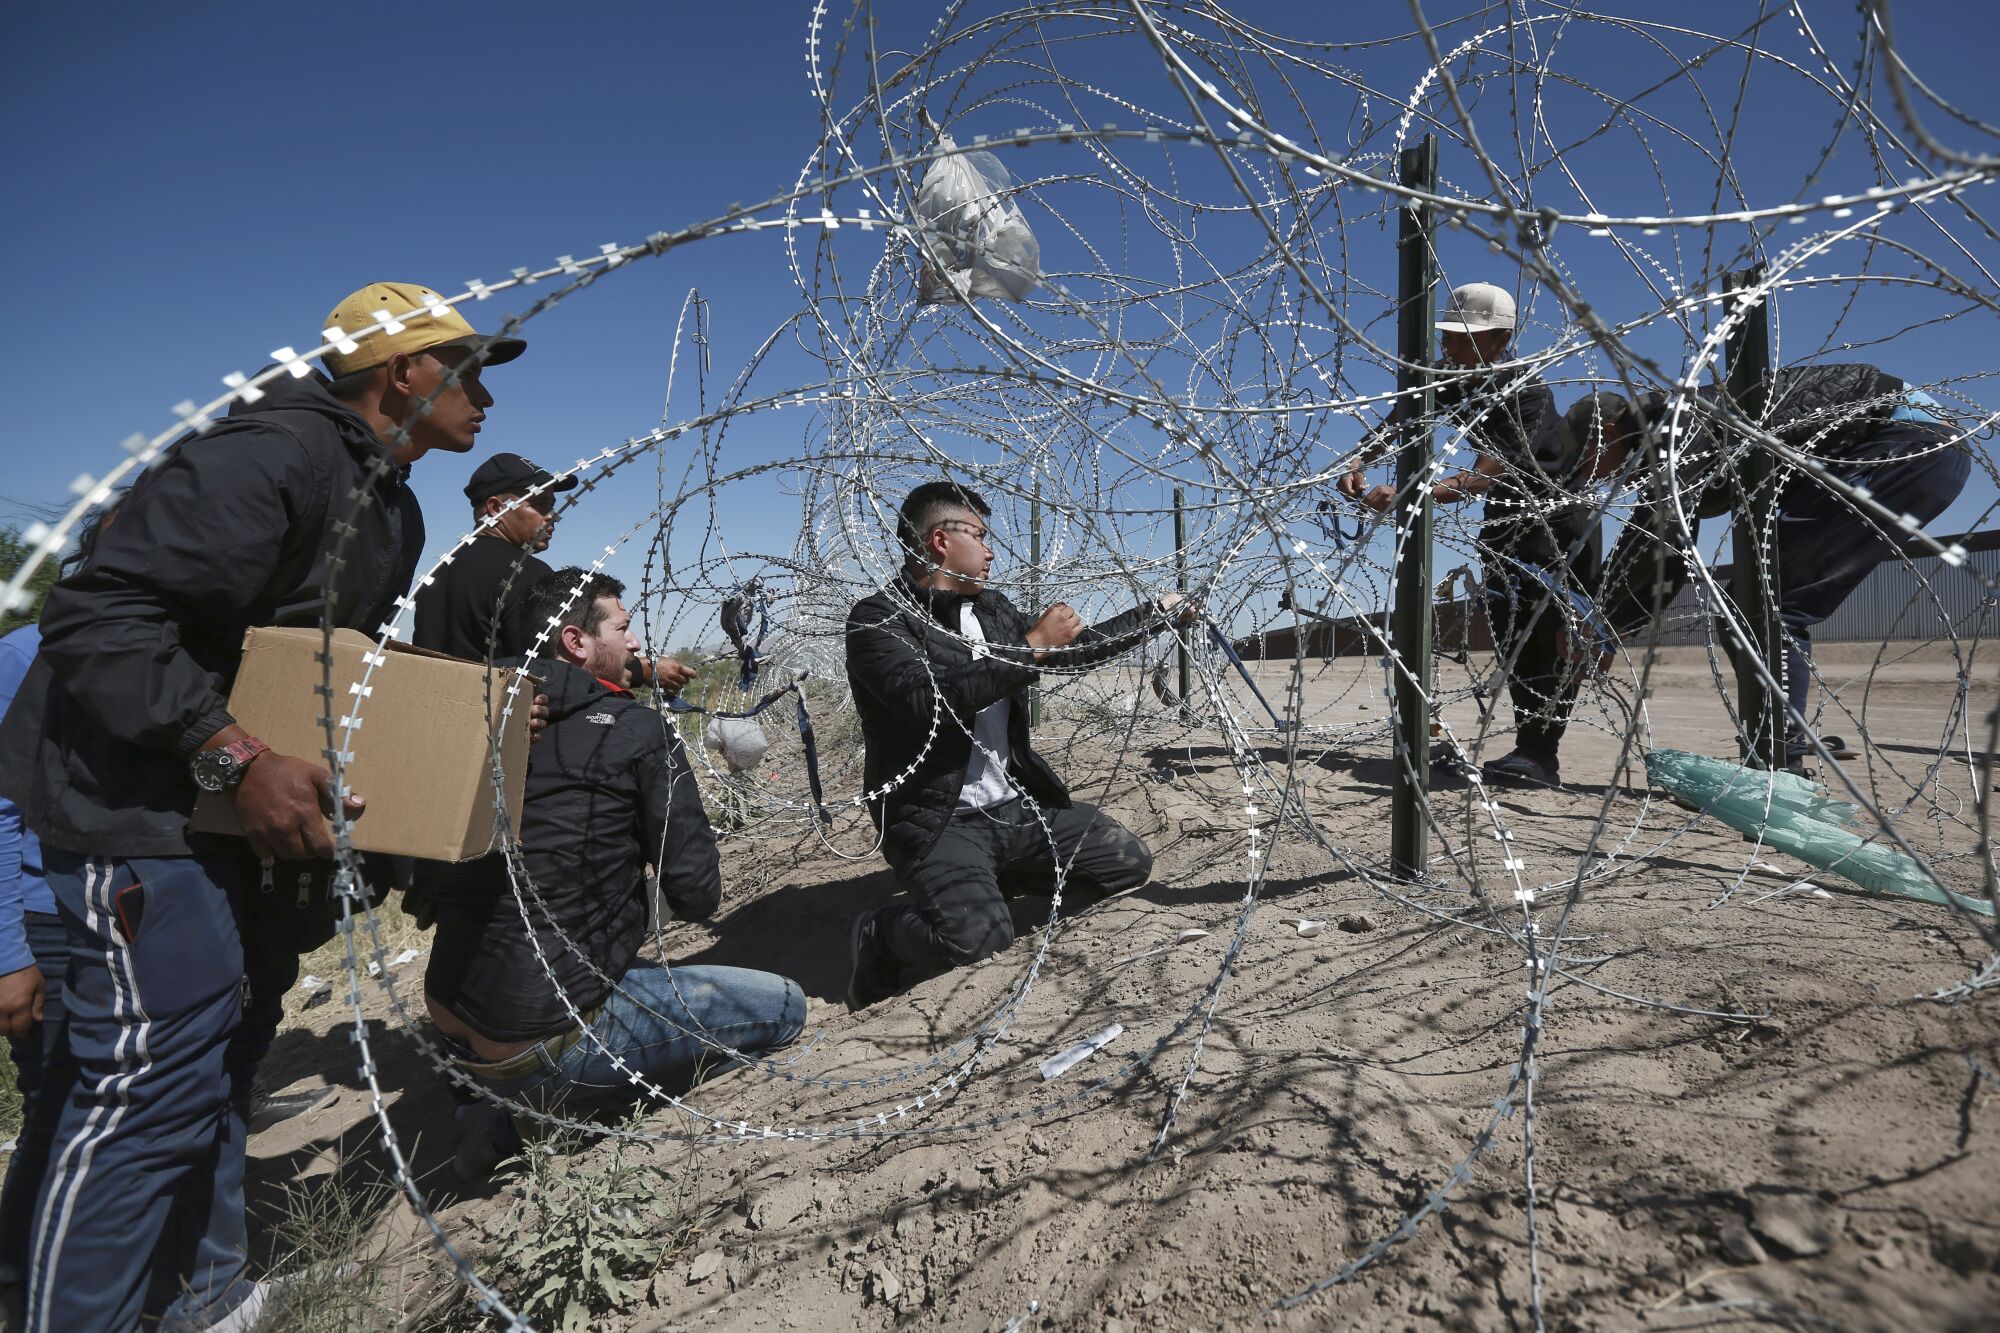 Migrants cross the barbed wire barrier into the United States from Ciudad Juarez, Mexico.